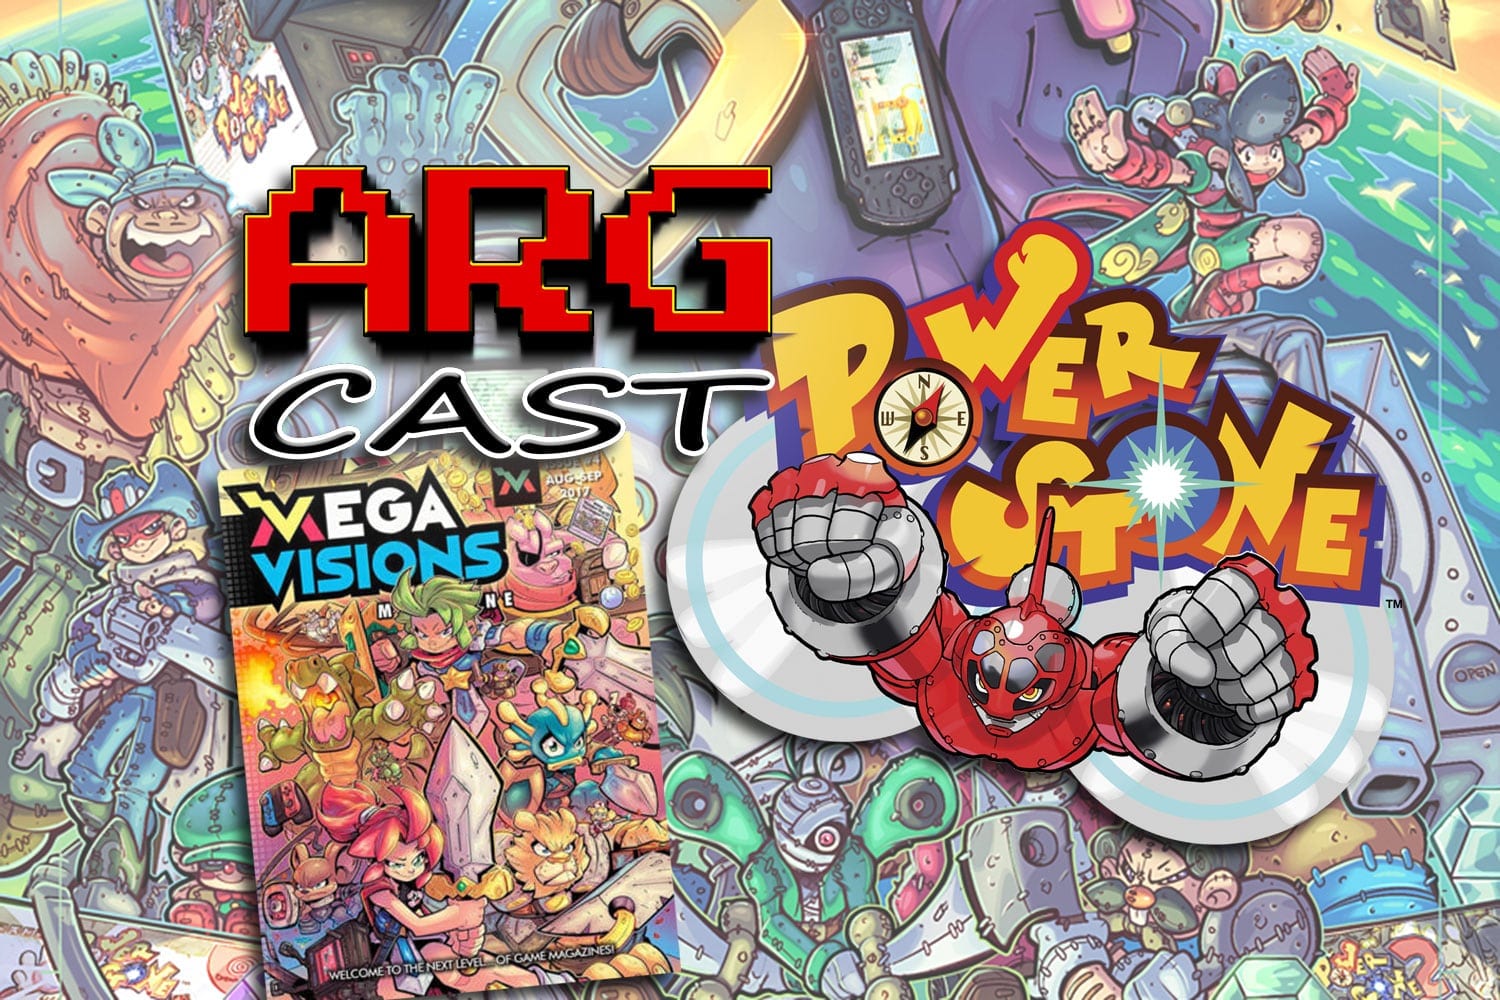 ARGcast #116: Power Stone and Mega Visions with Sketchcraft